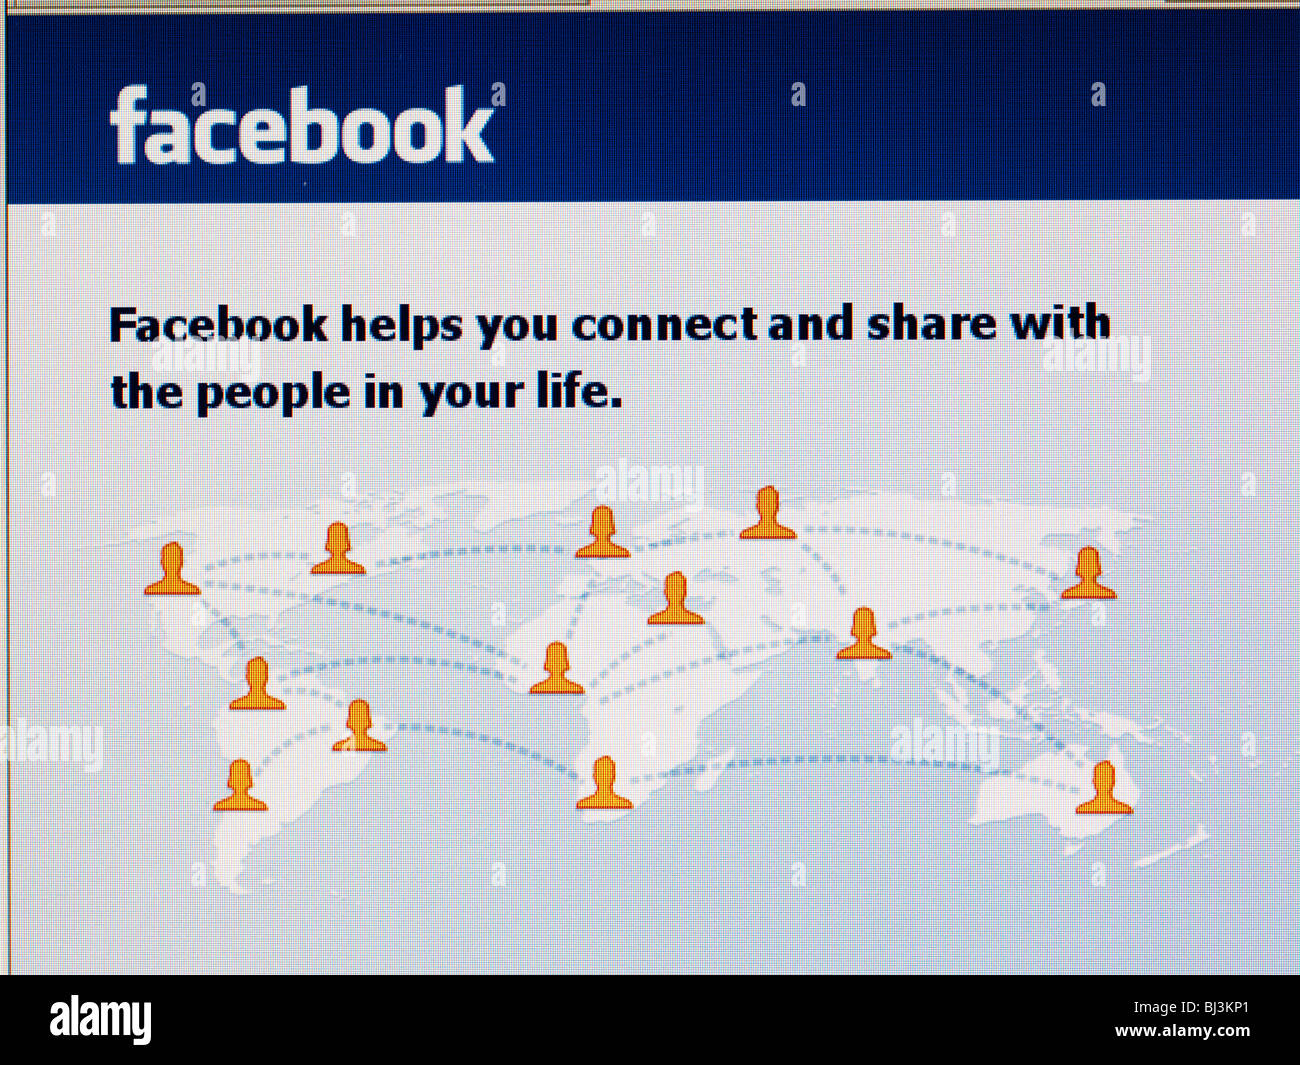 facebook social network internet website homepage close-up Stock Photo